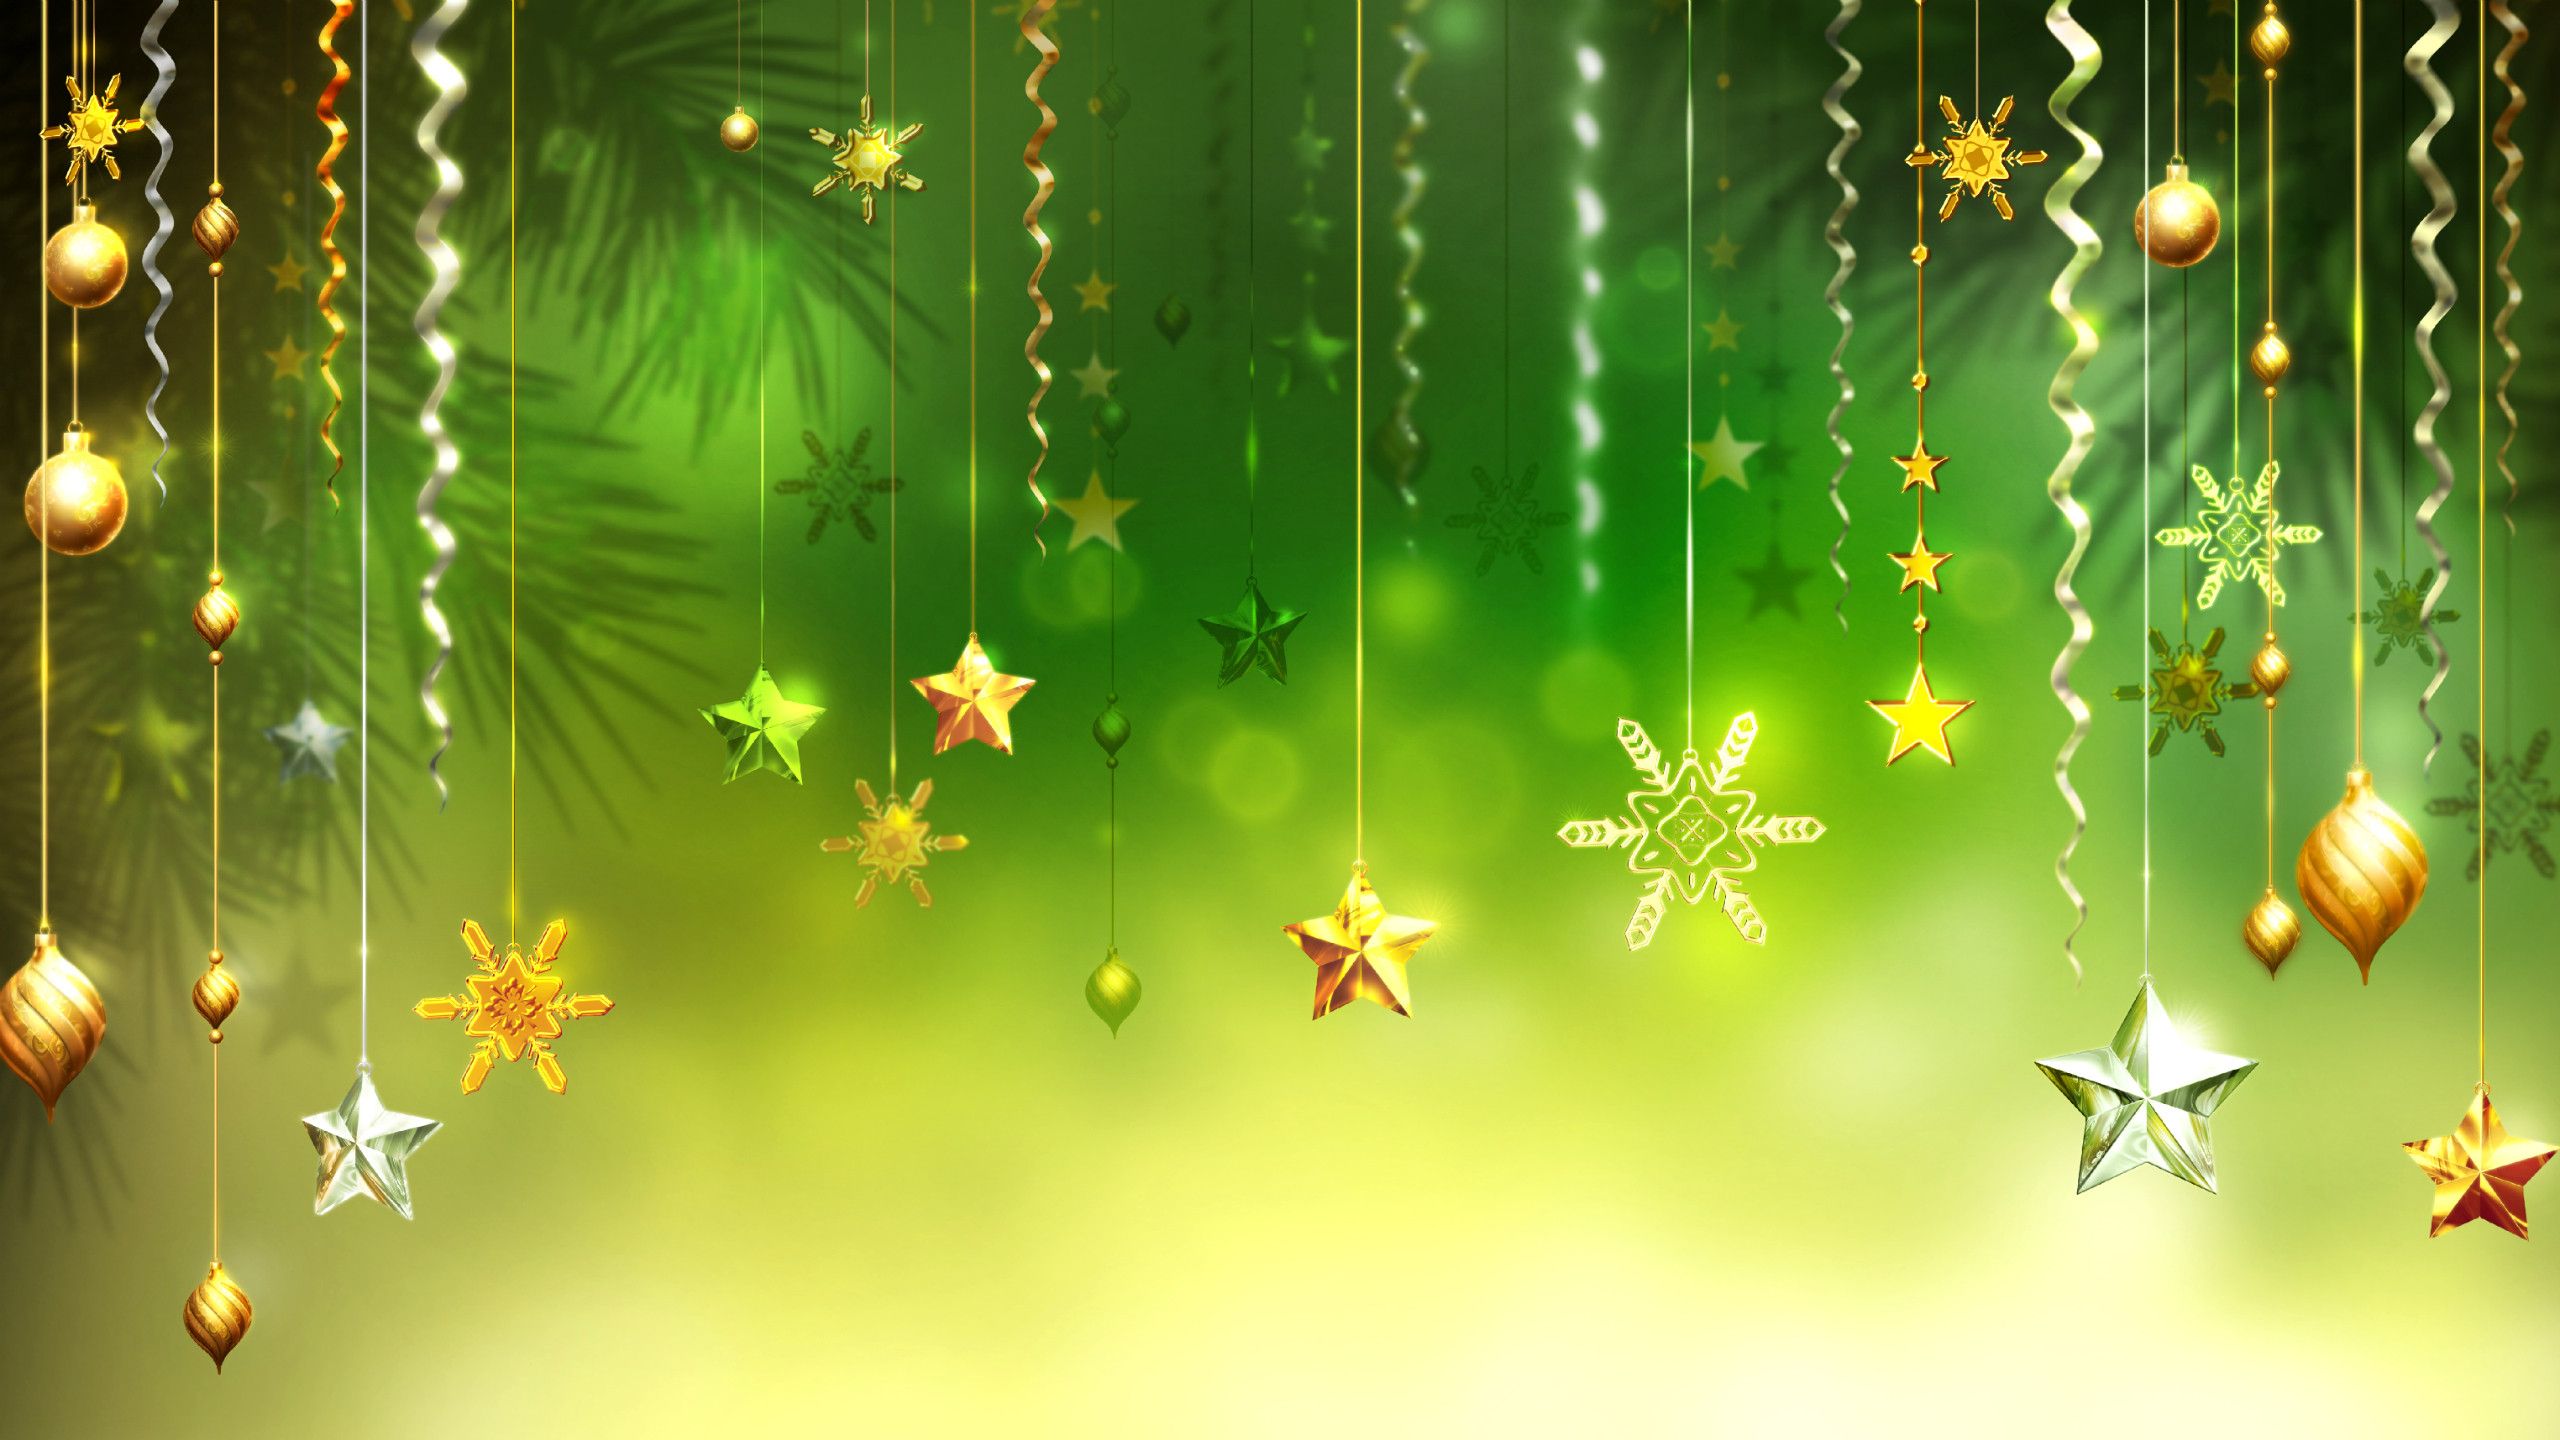 Top 10 Christmas Backgrounds Wallpapers (Green,Red,Blue) Nice ...